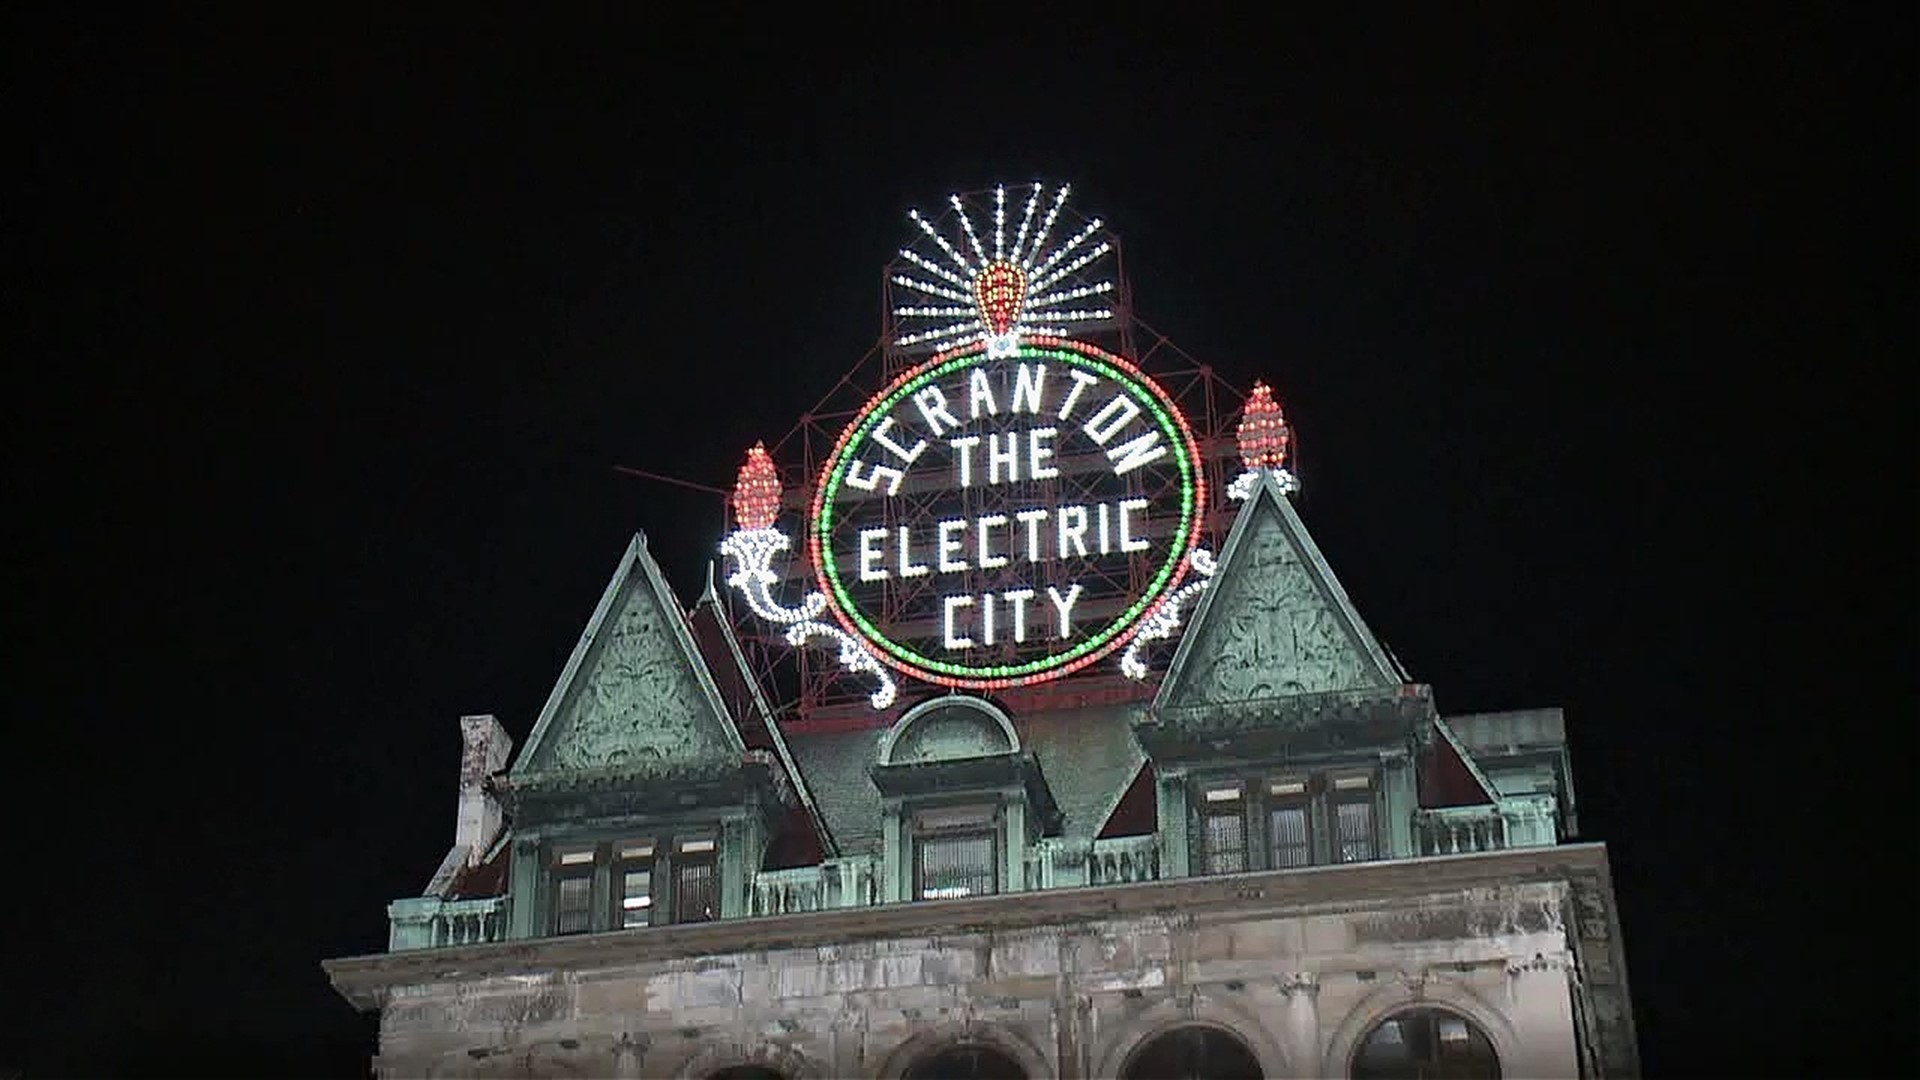 Fidelity Bank plans to keep the famous Electric City sign lit on Courthouse Square.